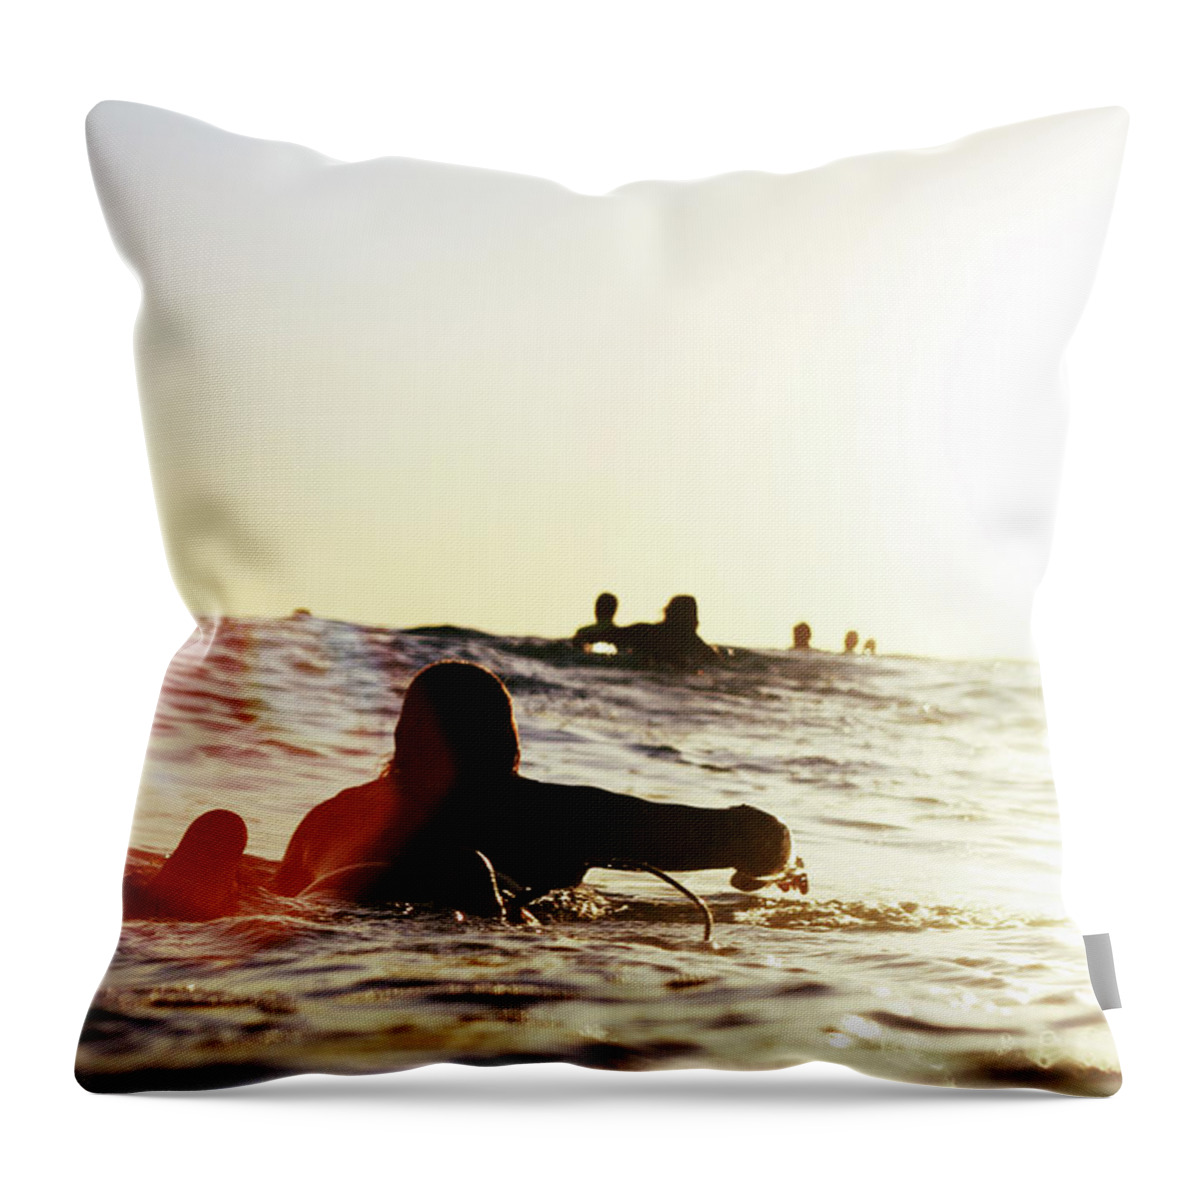 People Throw Pillow featuring the photograph Man On Surfer Paddle by Photography By Jack De La Mare. 2012